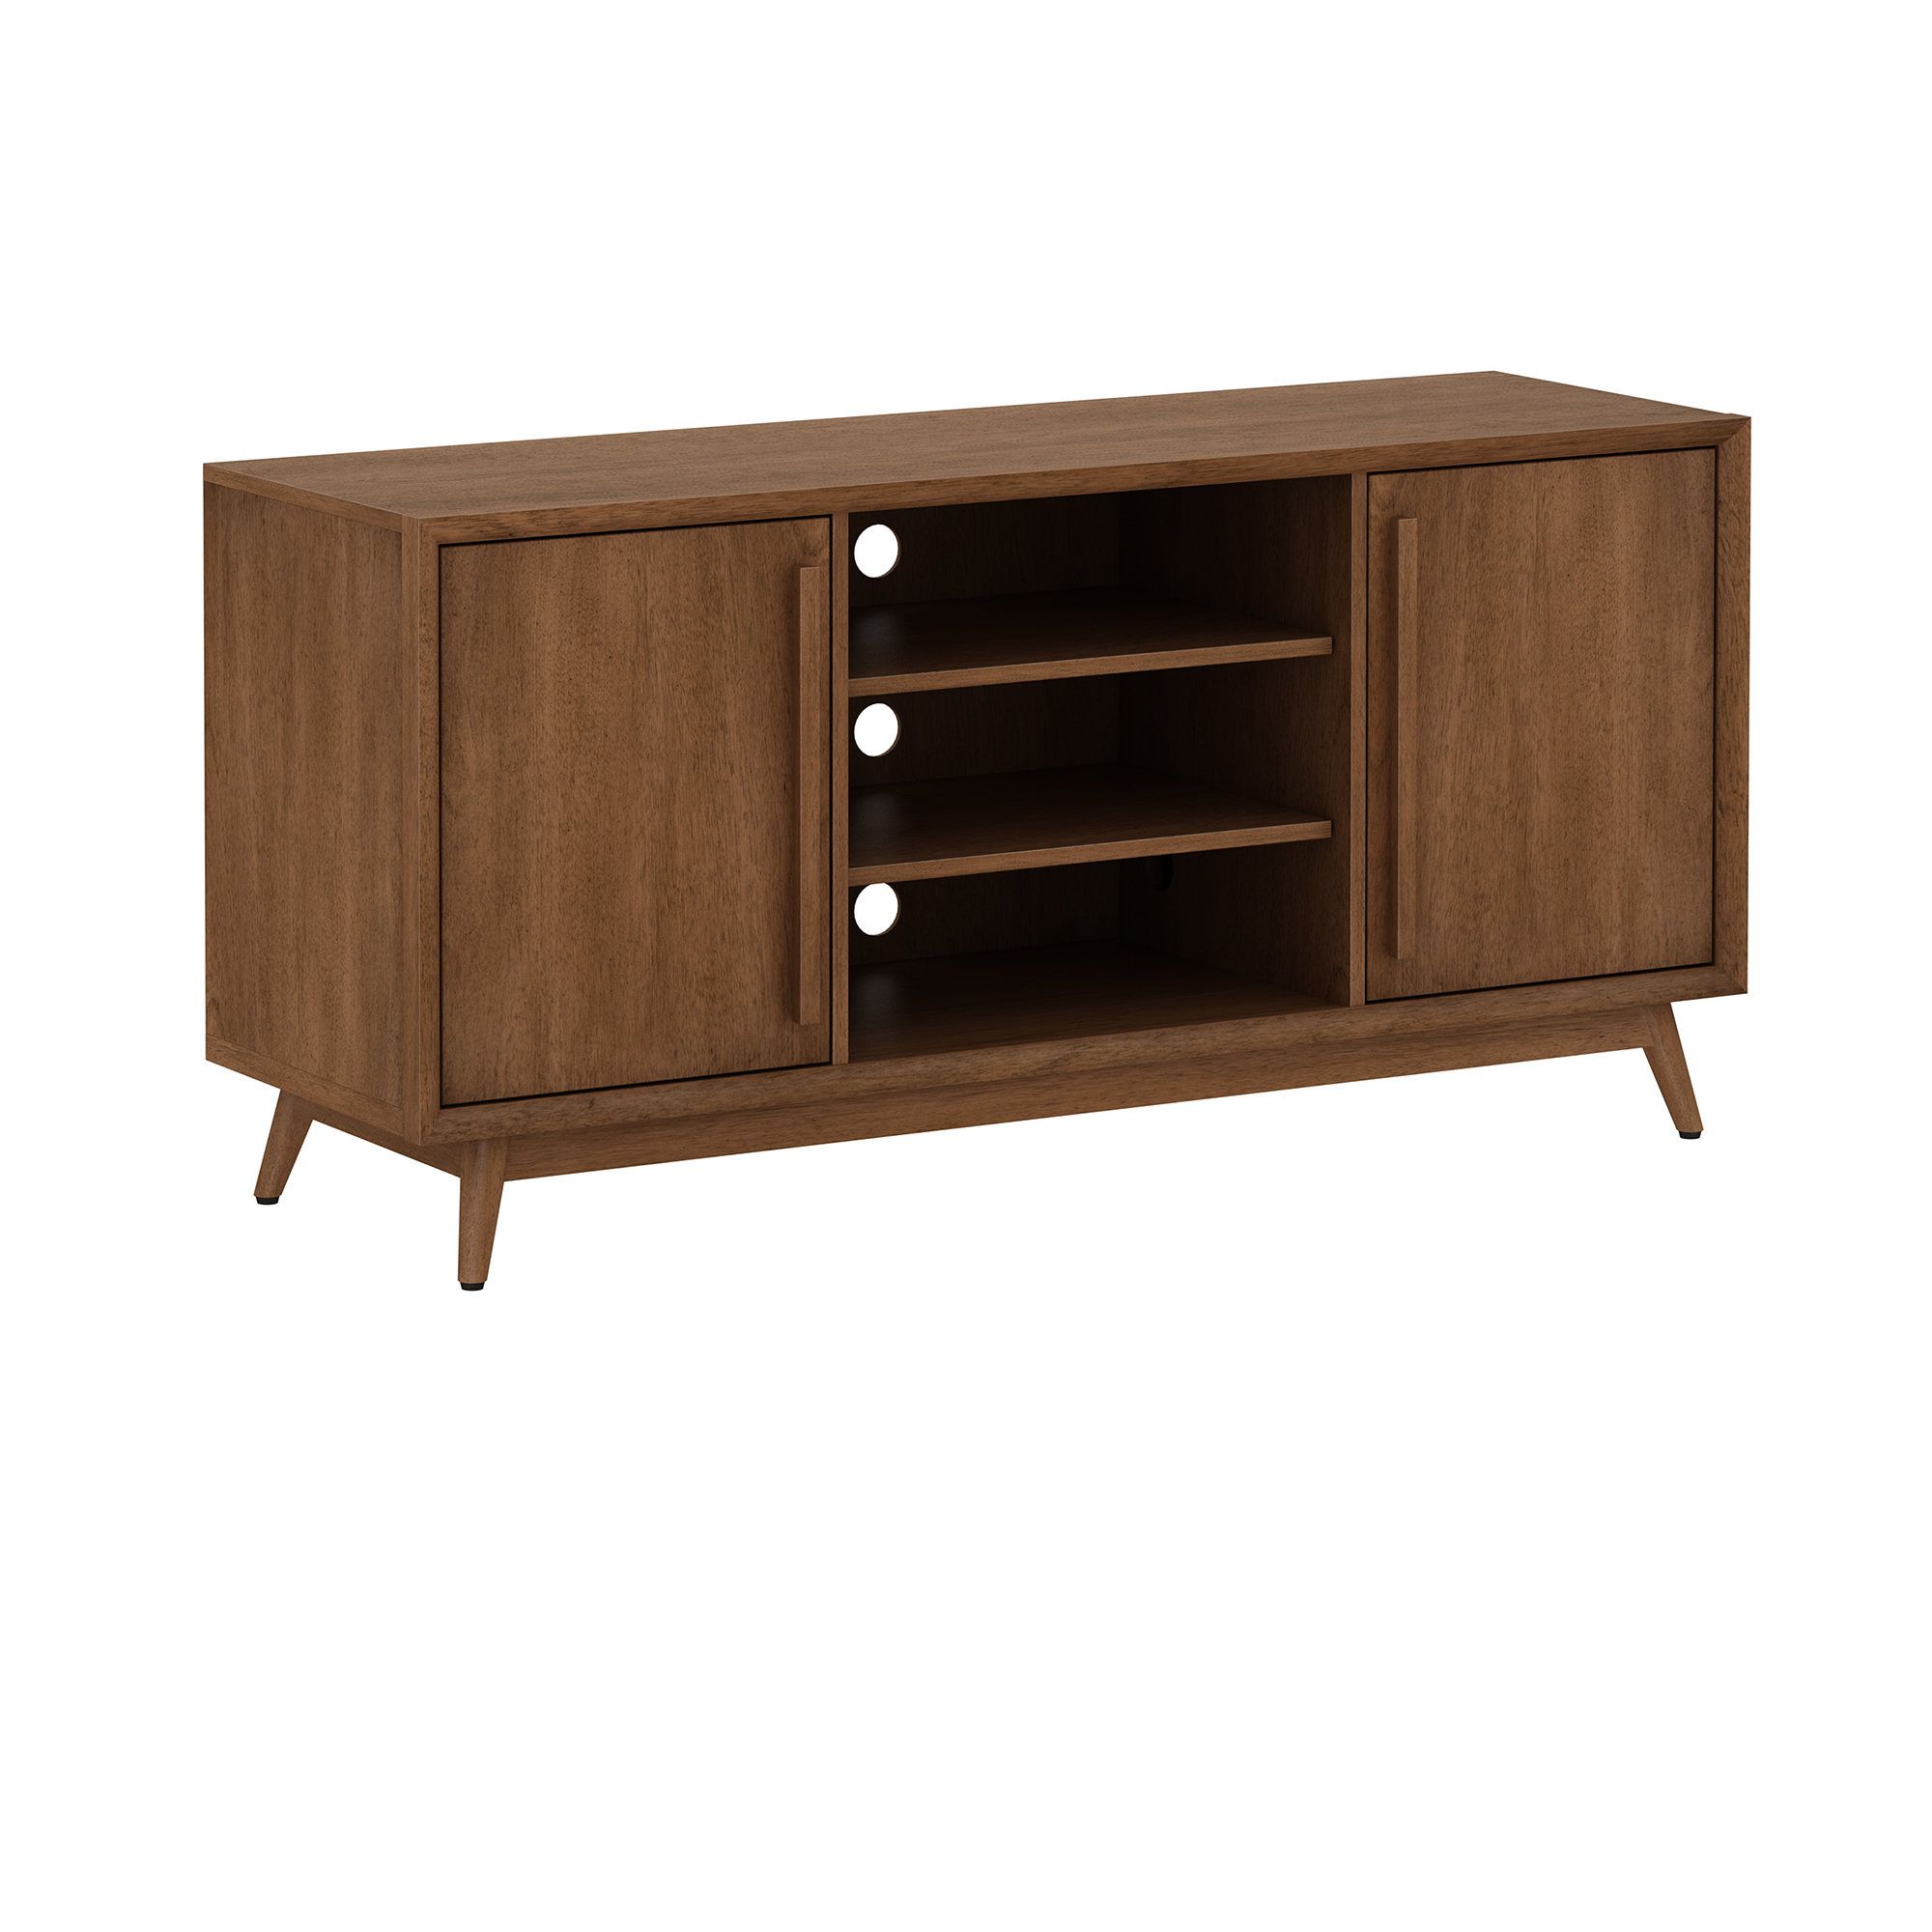 Allmodern Intended For Low Profile Contemporary Tv Stands (View 3 of 20)